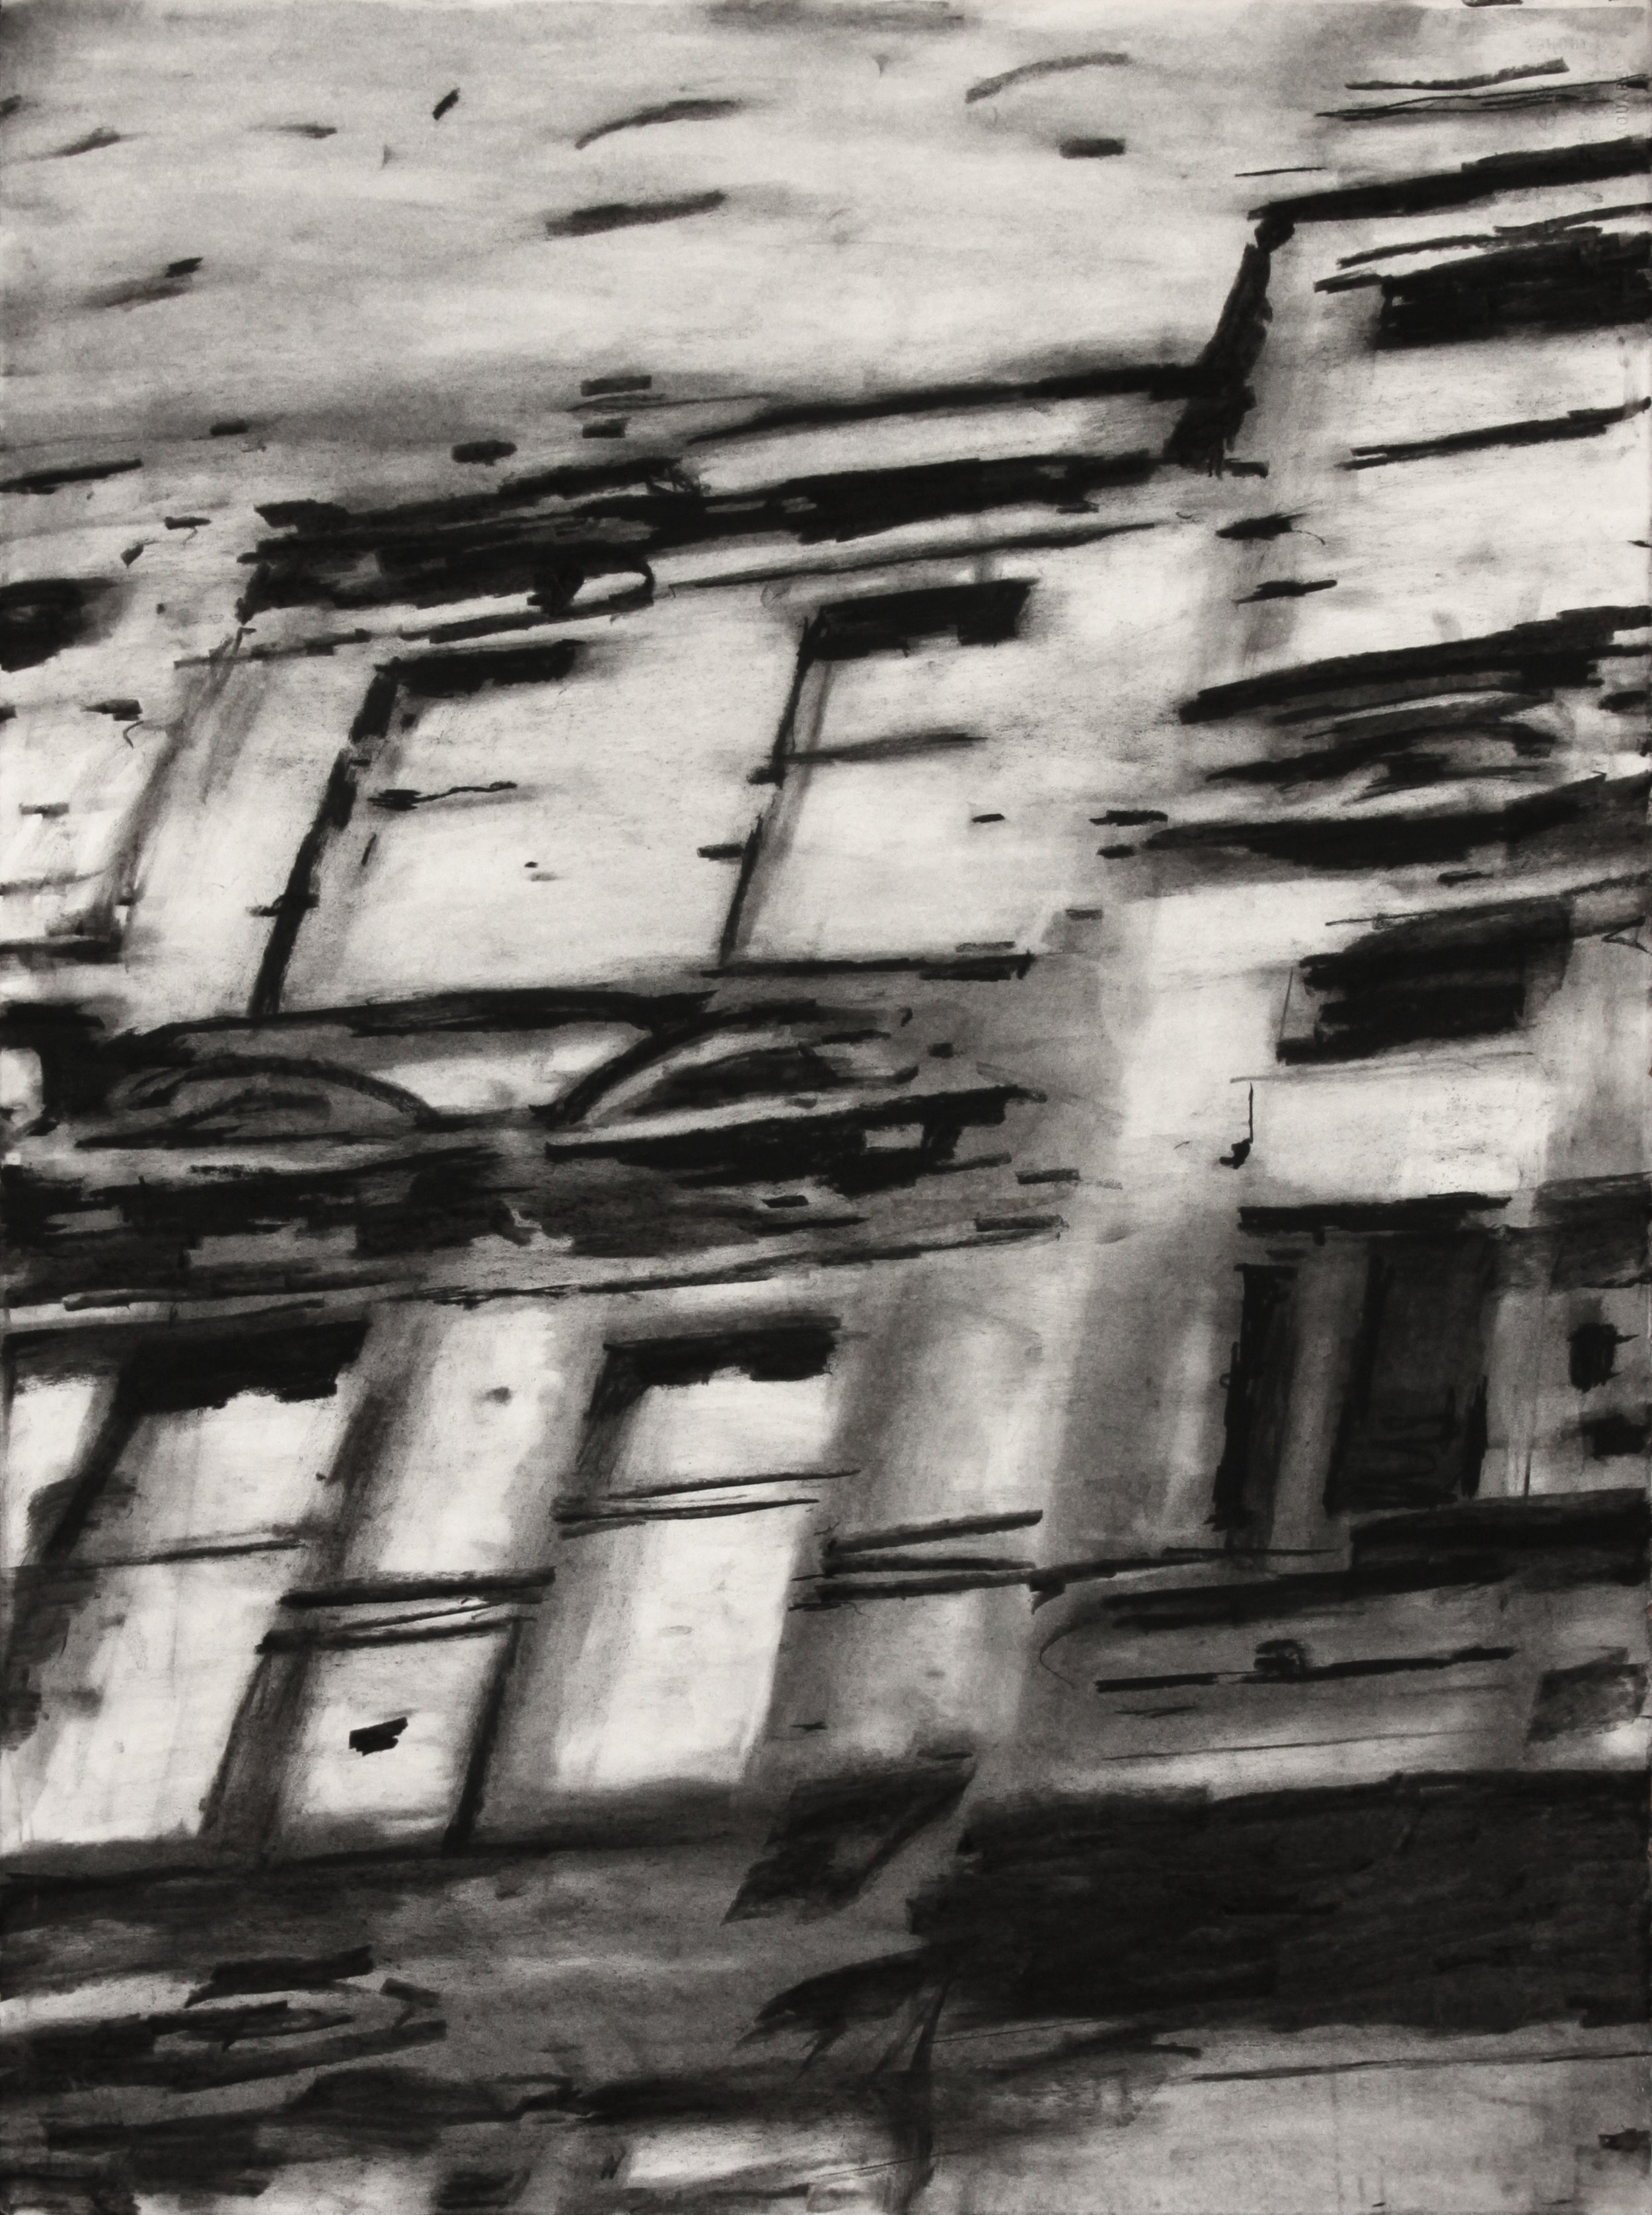   West Facade       2021  Charcoal on Paper      30” x 22”   